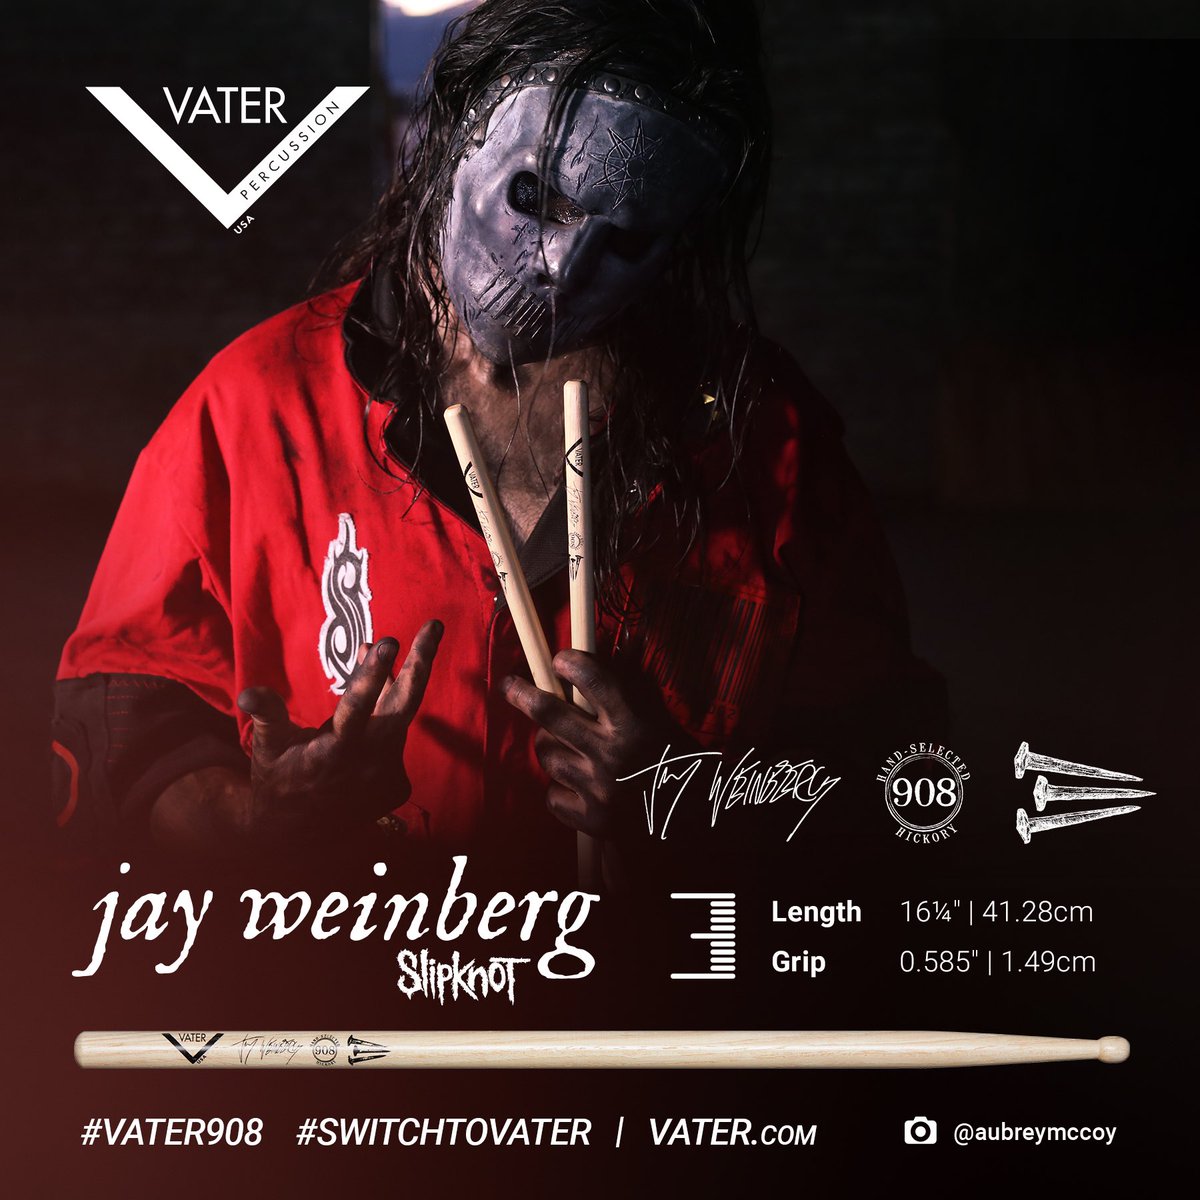 Happy 3rd Birthday to the @VaterDrumsticks @jayweinbergdrum 908! vater.com/product/981856